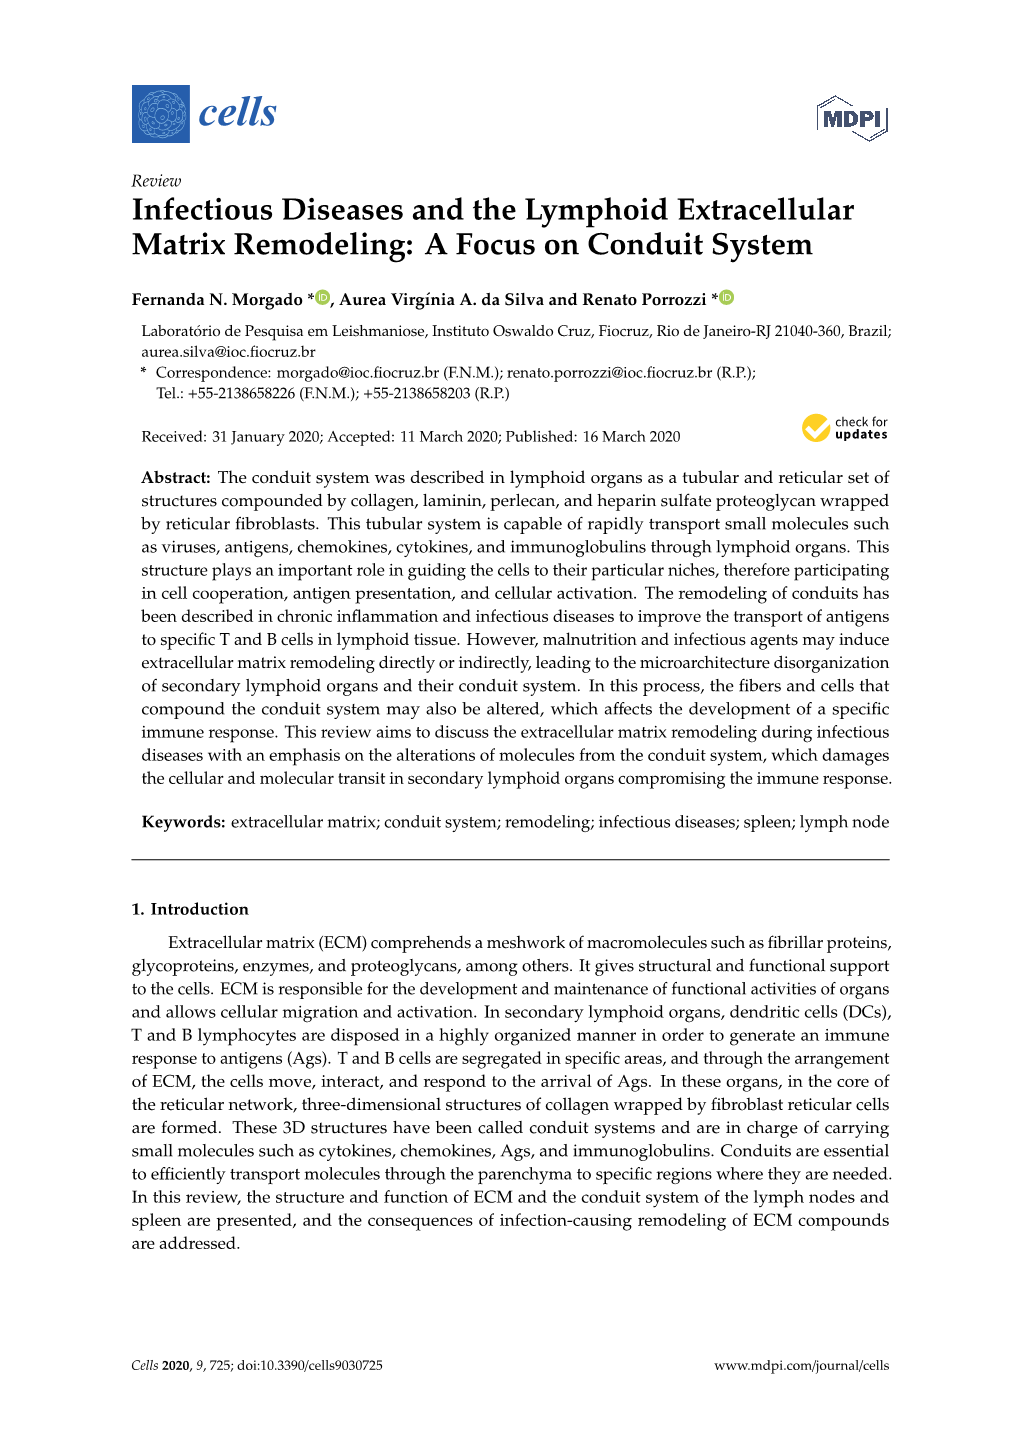 Infectious Diseases and the Lymphoid Extracellular Matrix Remodeling: a Focus on Conduit System